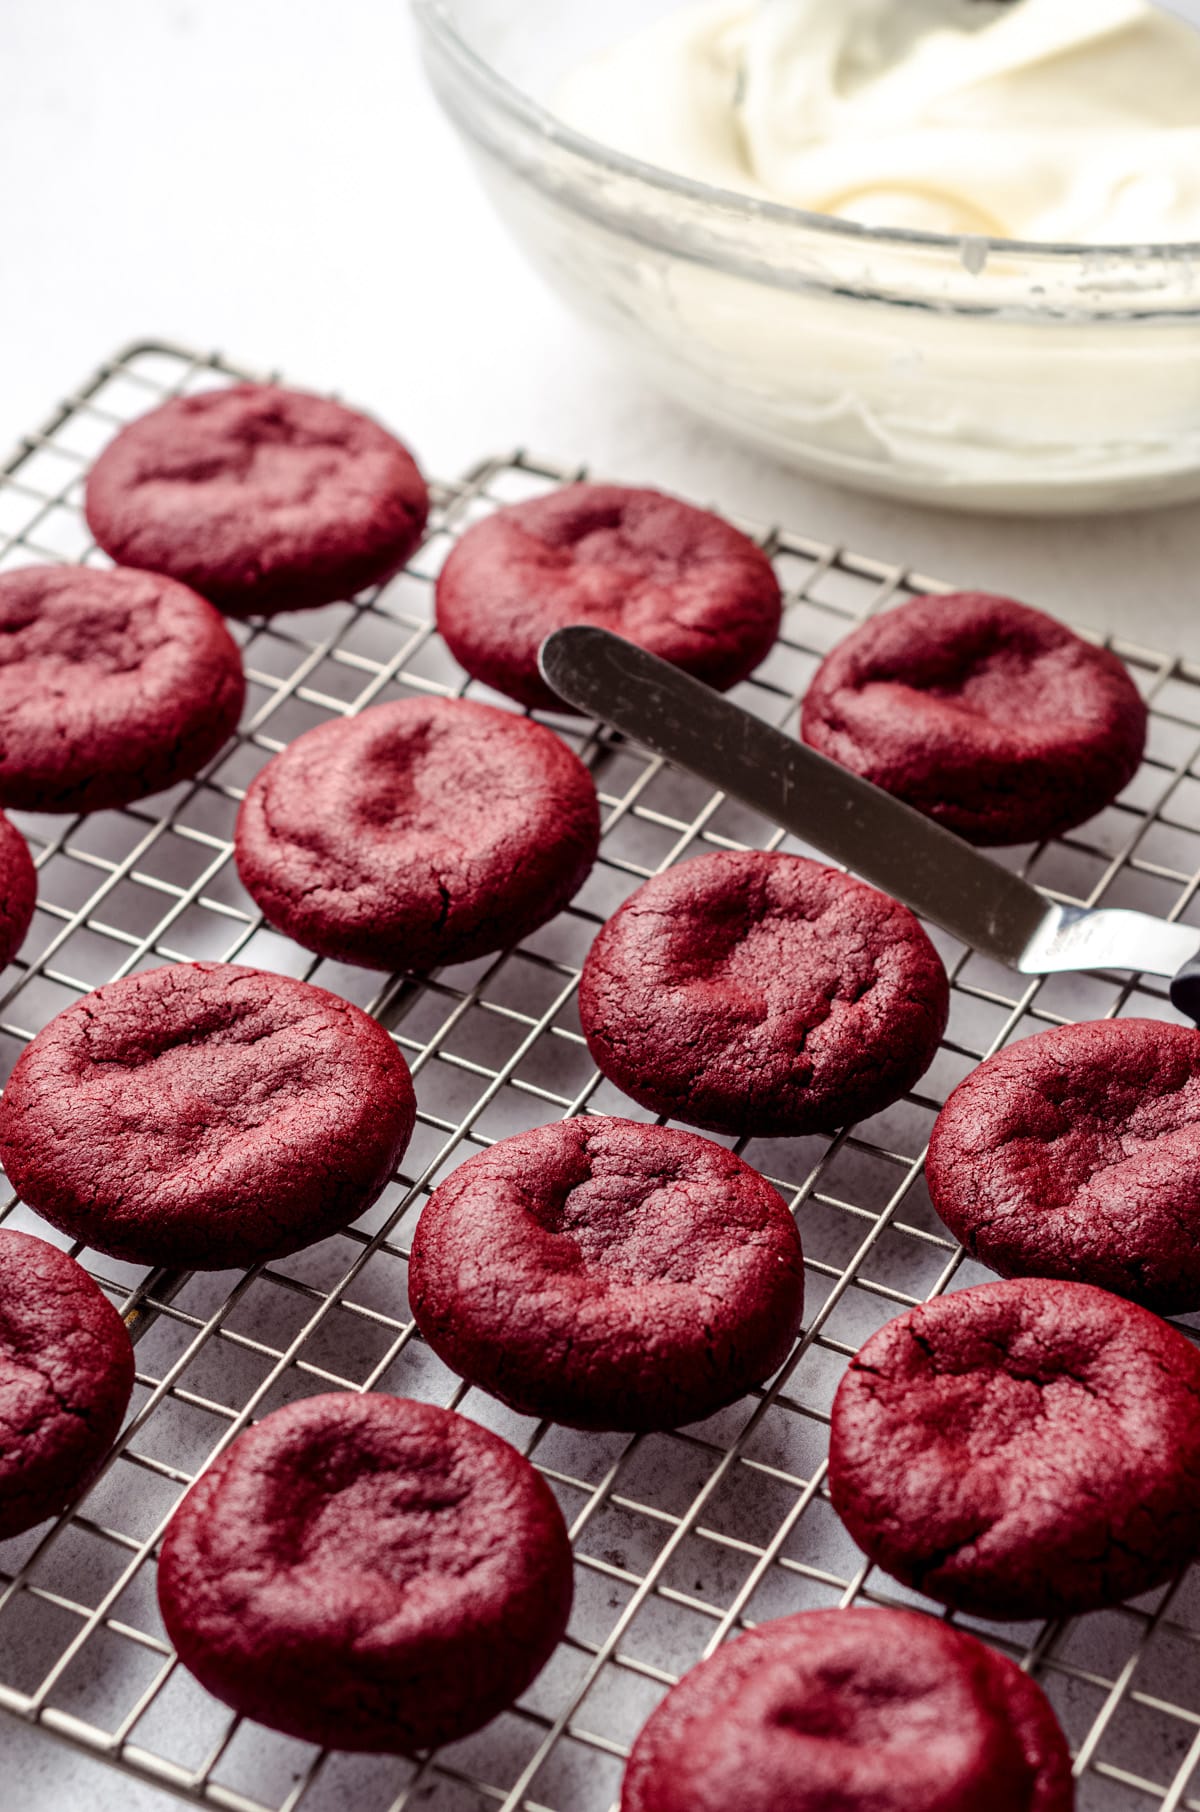 Lots of red velvet cookies, after being baked, are left to cool on a silver wire rack.